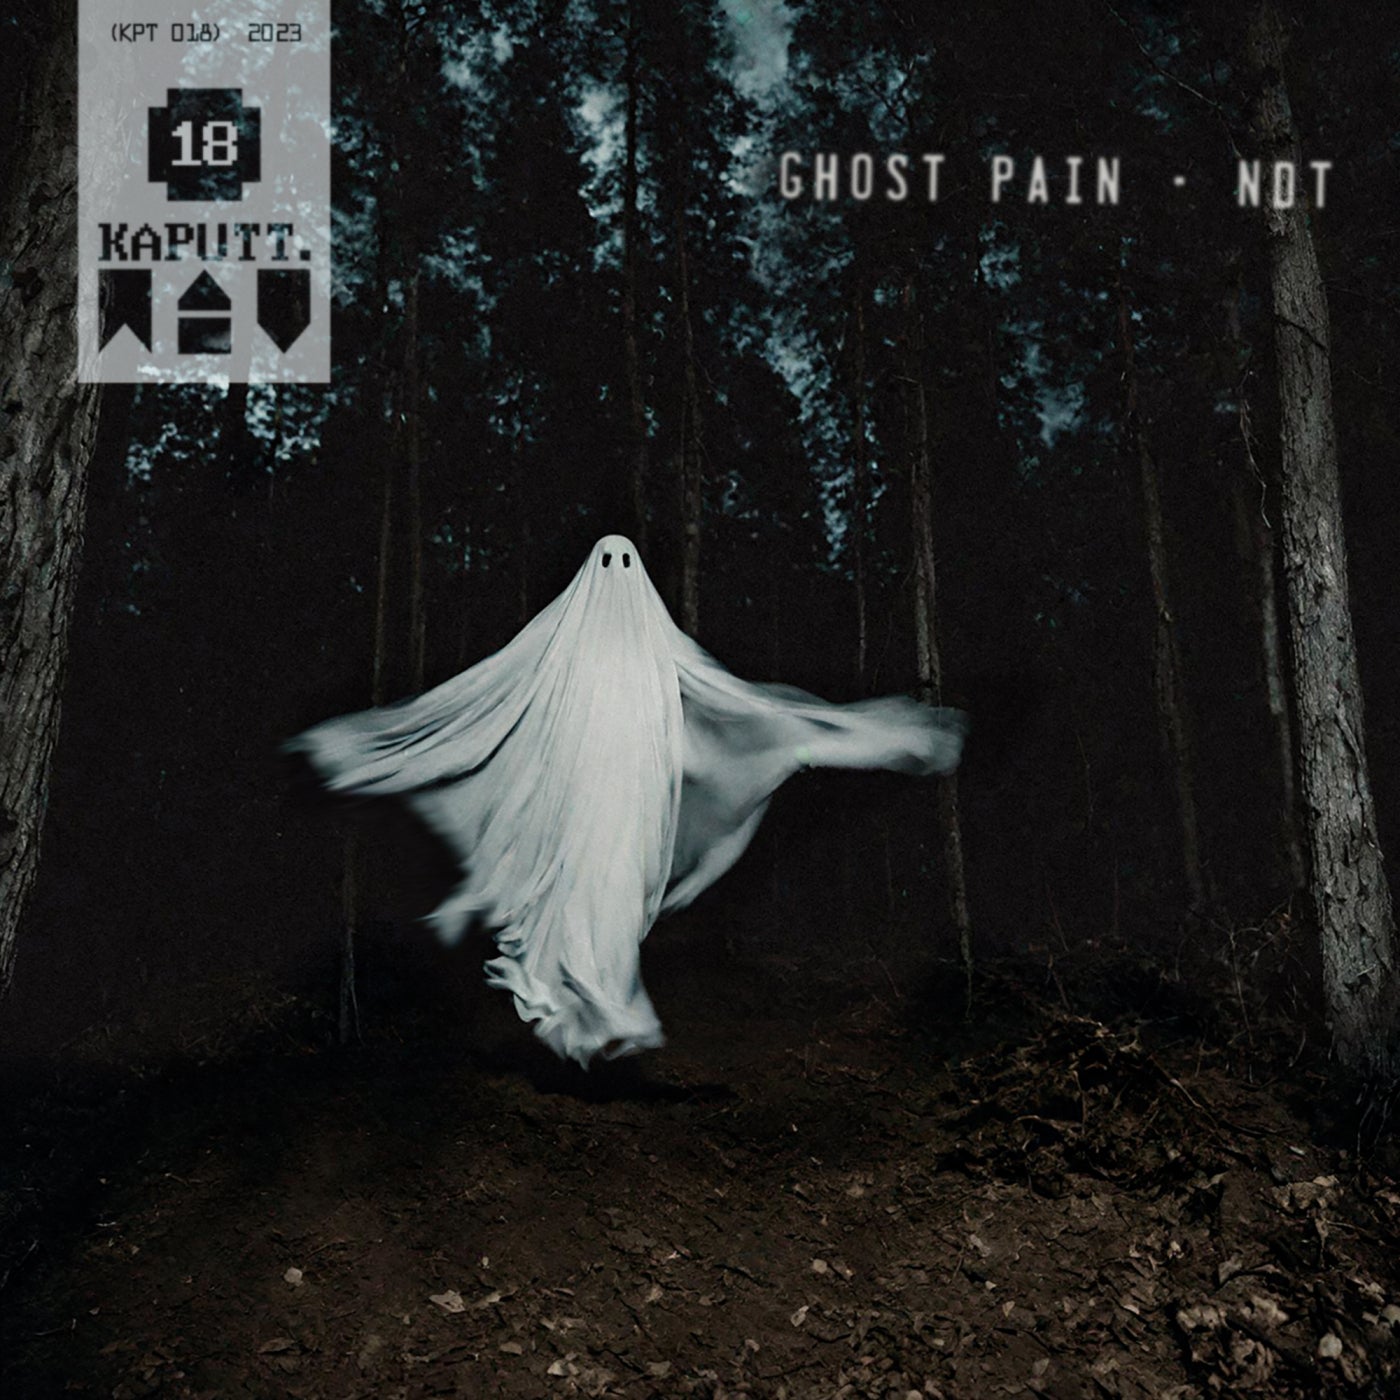 GHOST PAIN